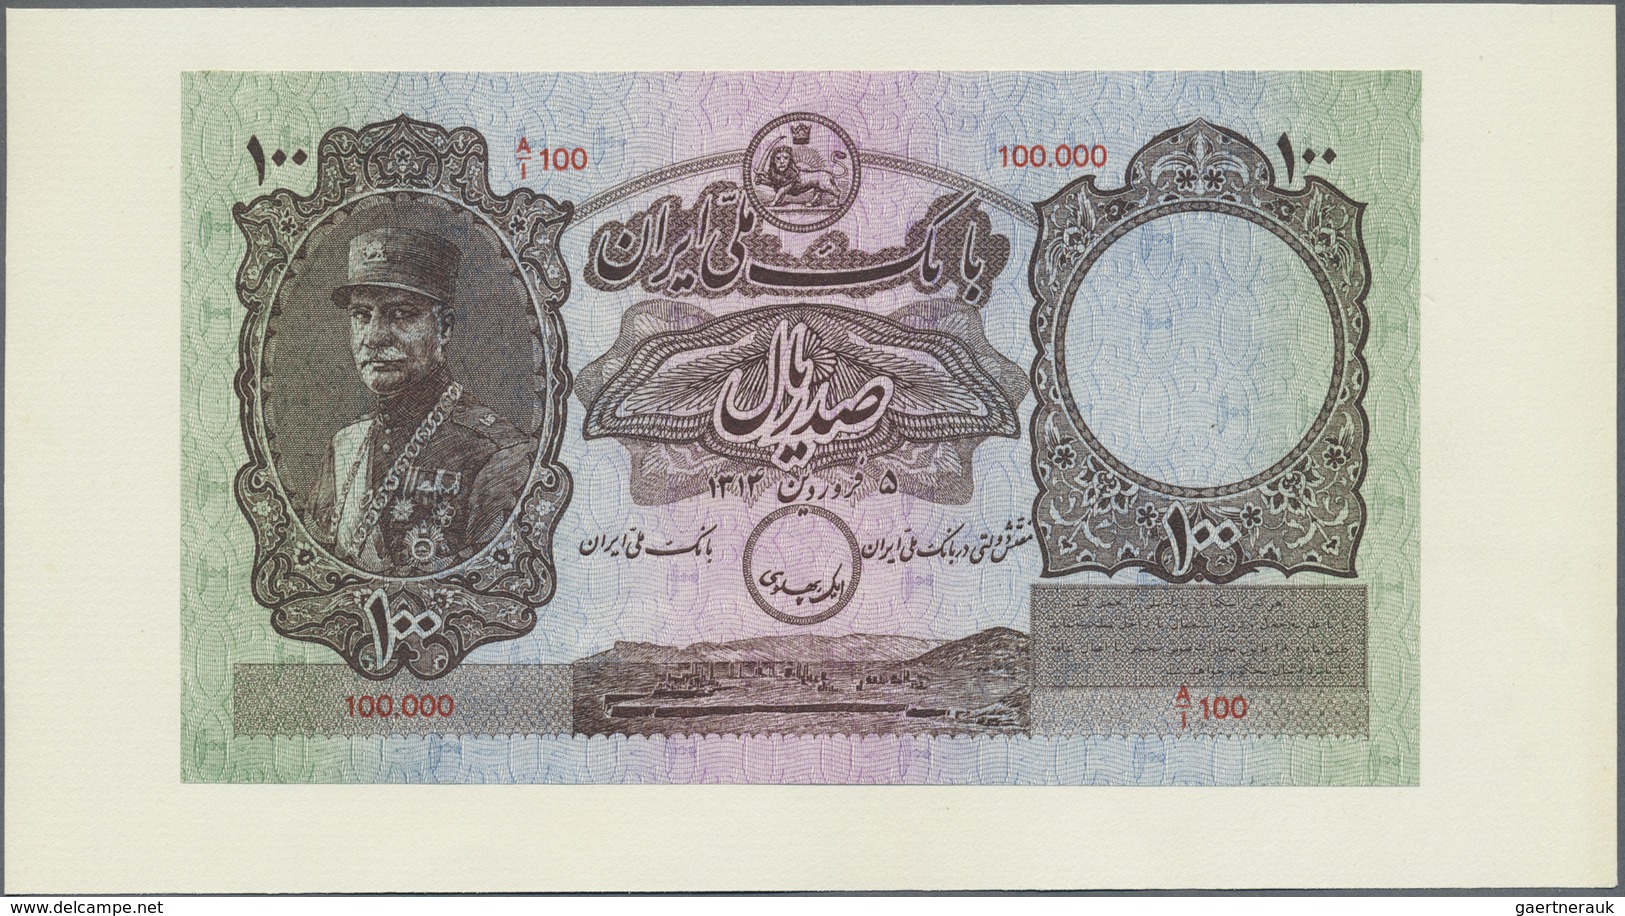 Iran: Worldwide Unique - Proof Trial Print For A KINGFOM OF IRAN Under The Bank Name "Bank Melli Ira - Iran